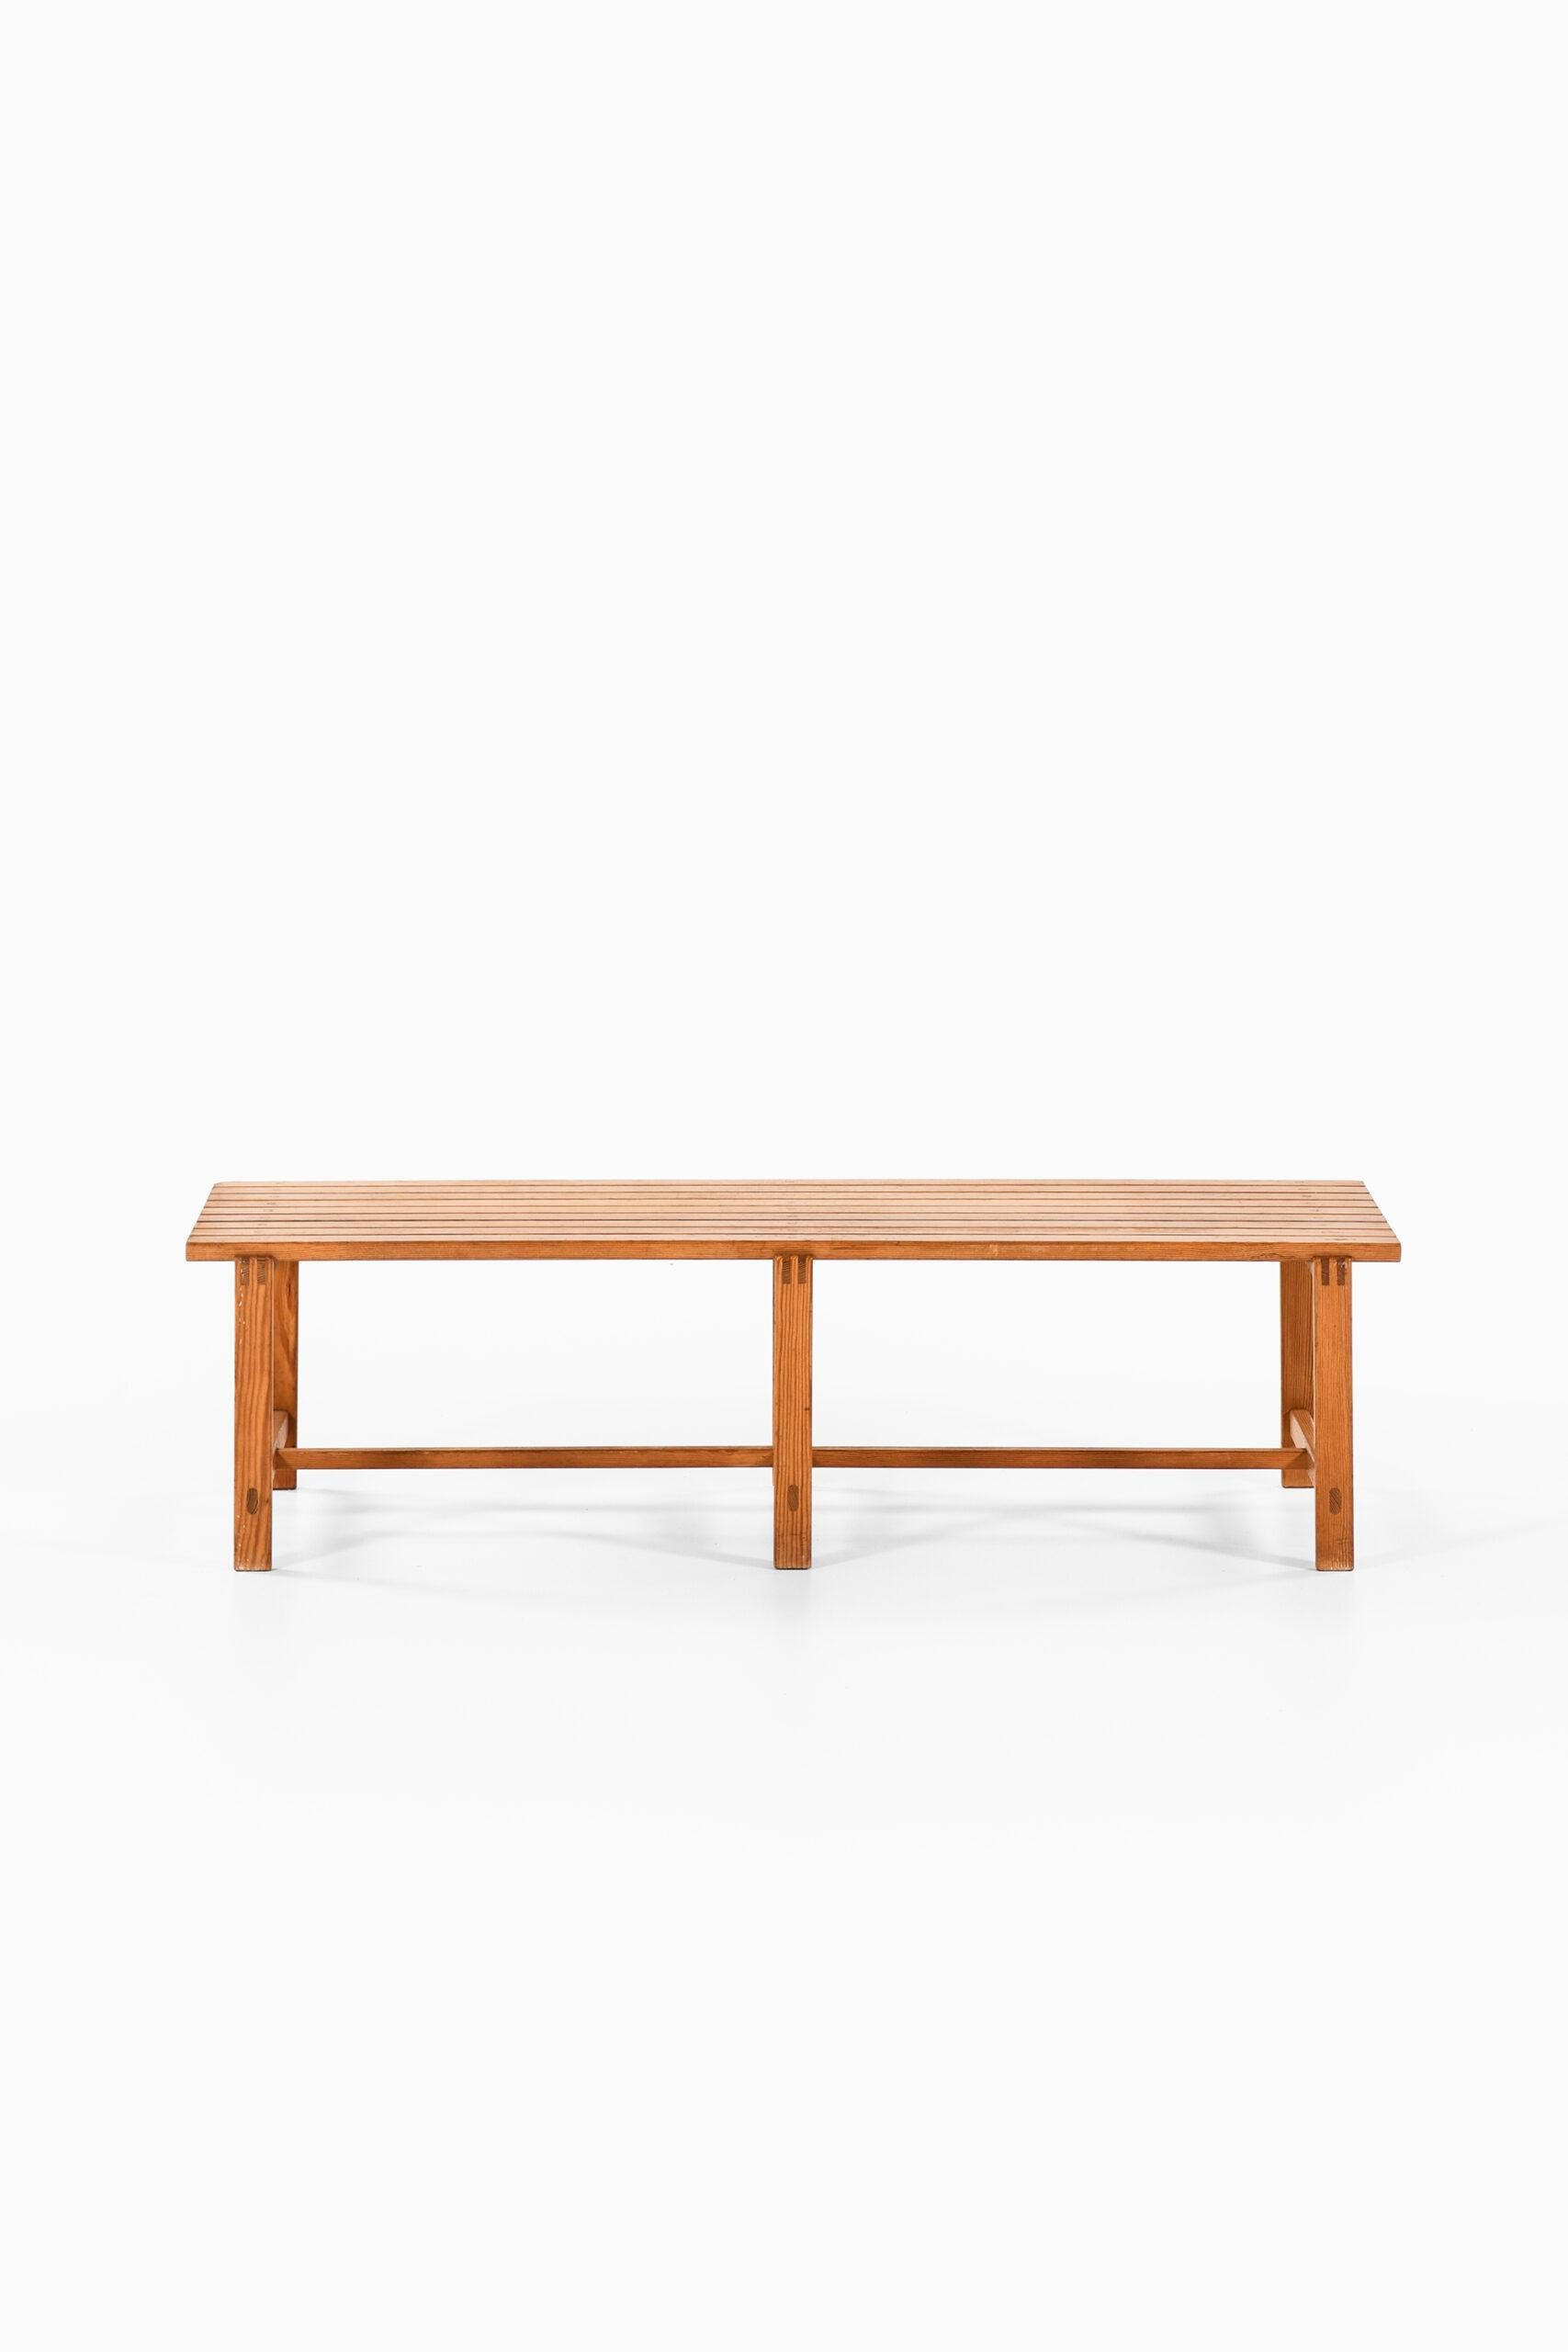 Rare bench / side table by unknown designer. Produced in Sweden.